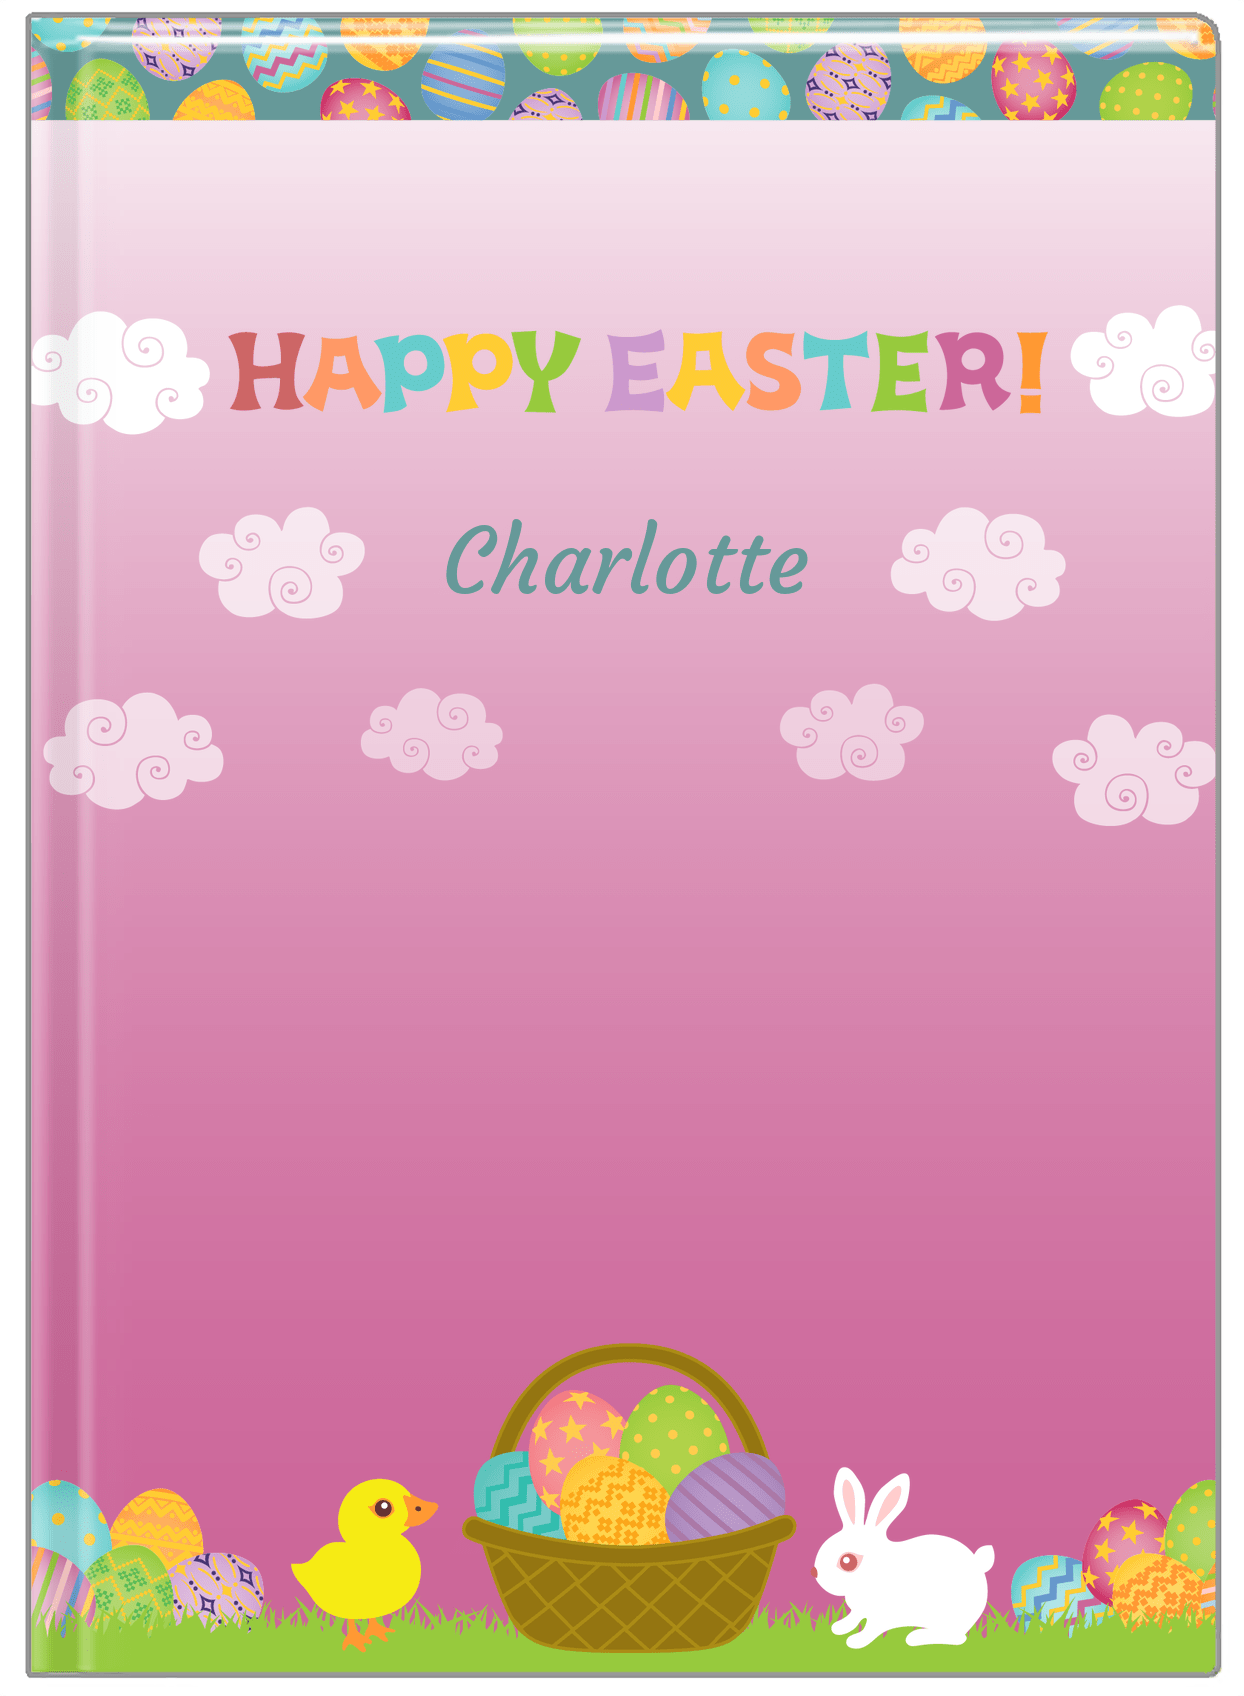 Personalized Easter Journal V - Easter Basket - Pink Background - Front View